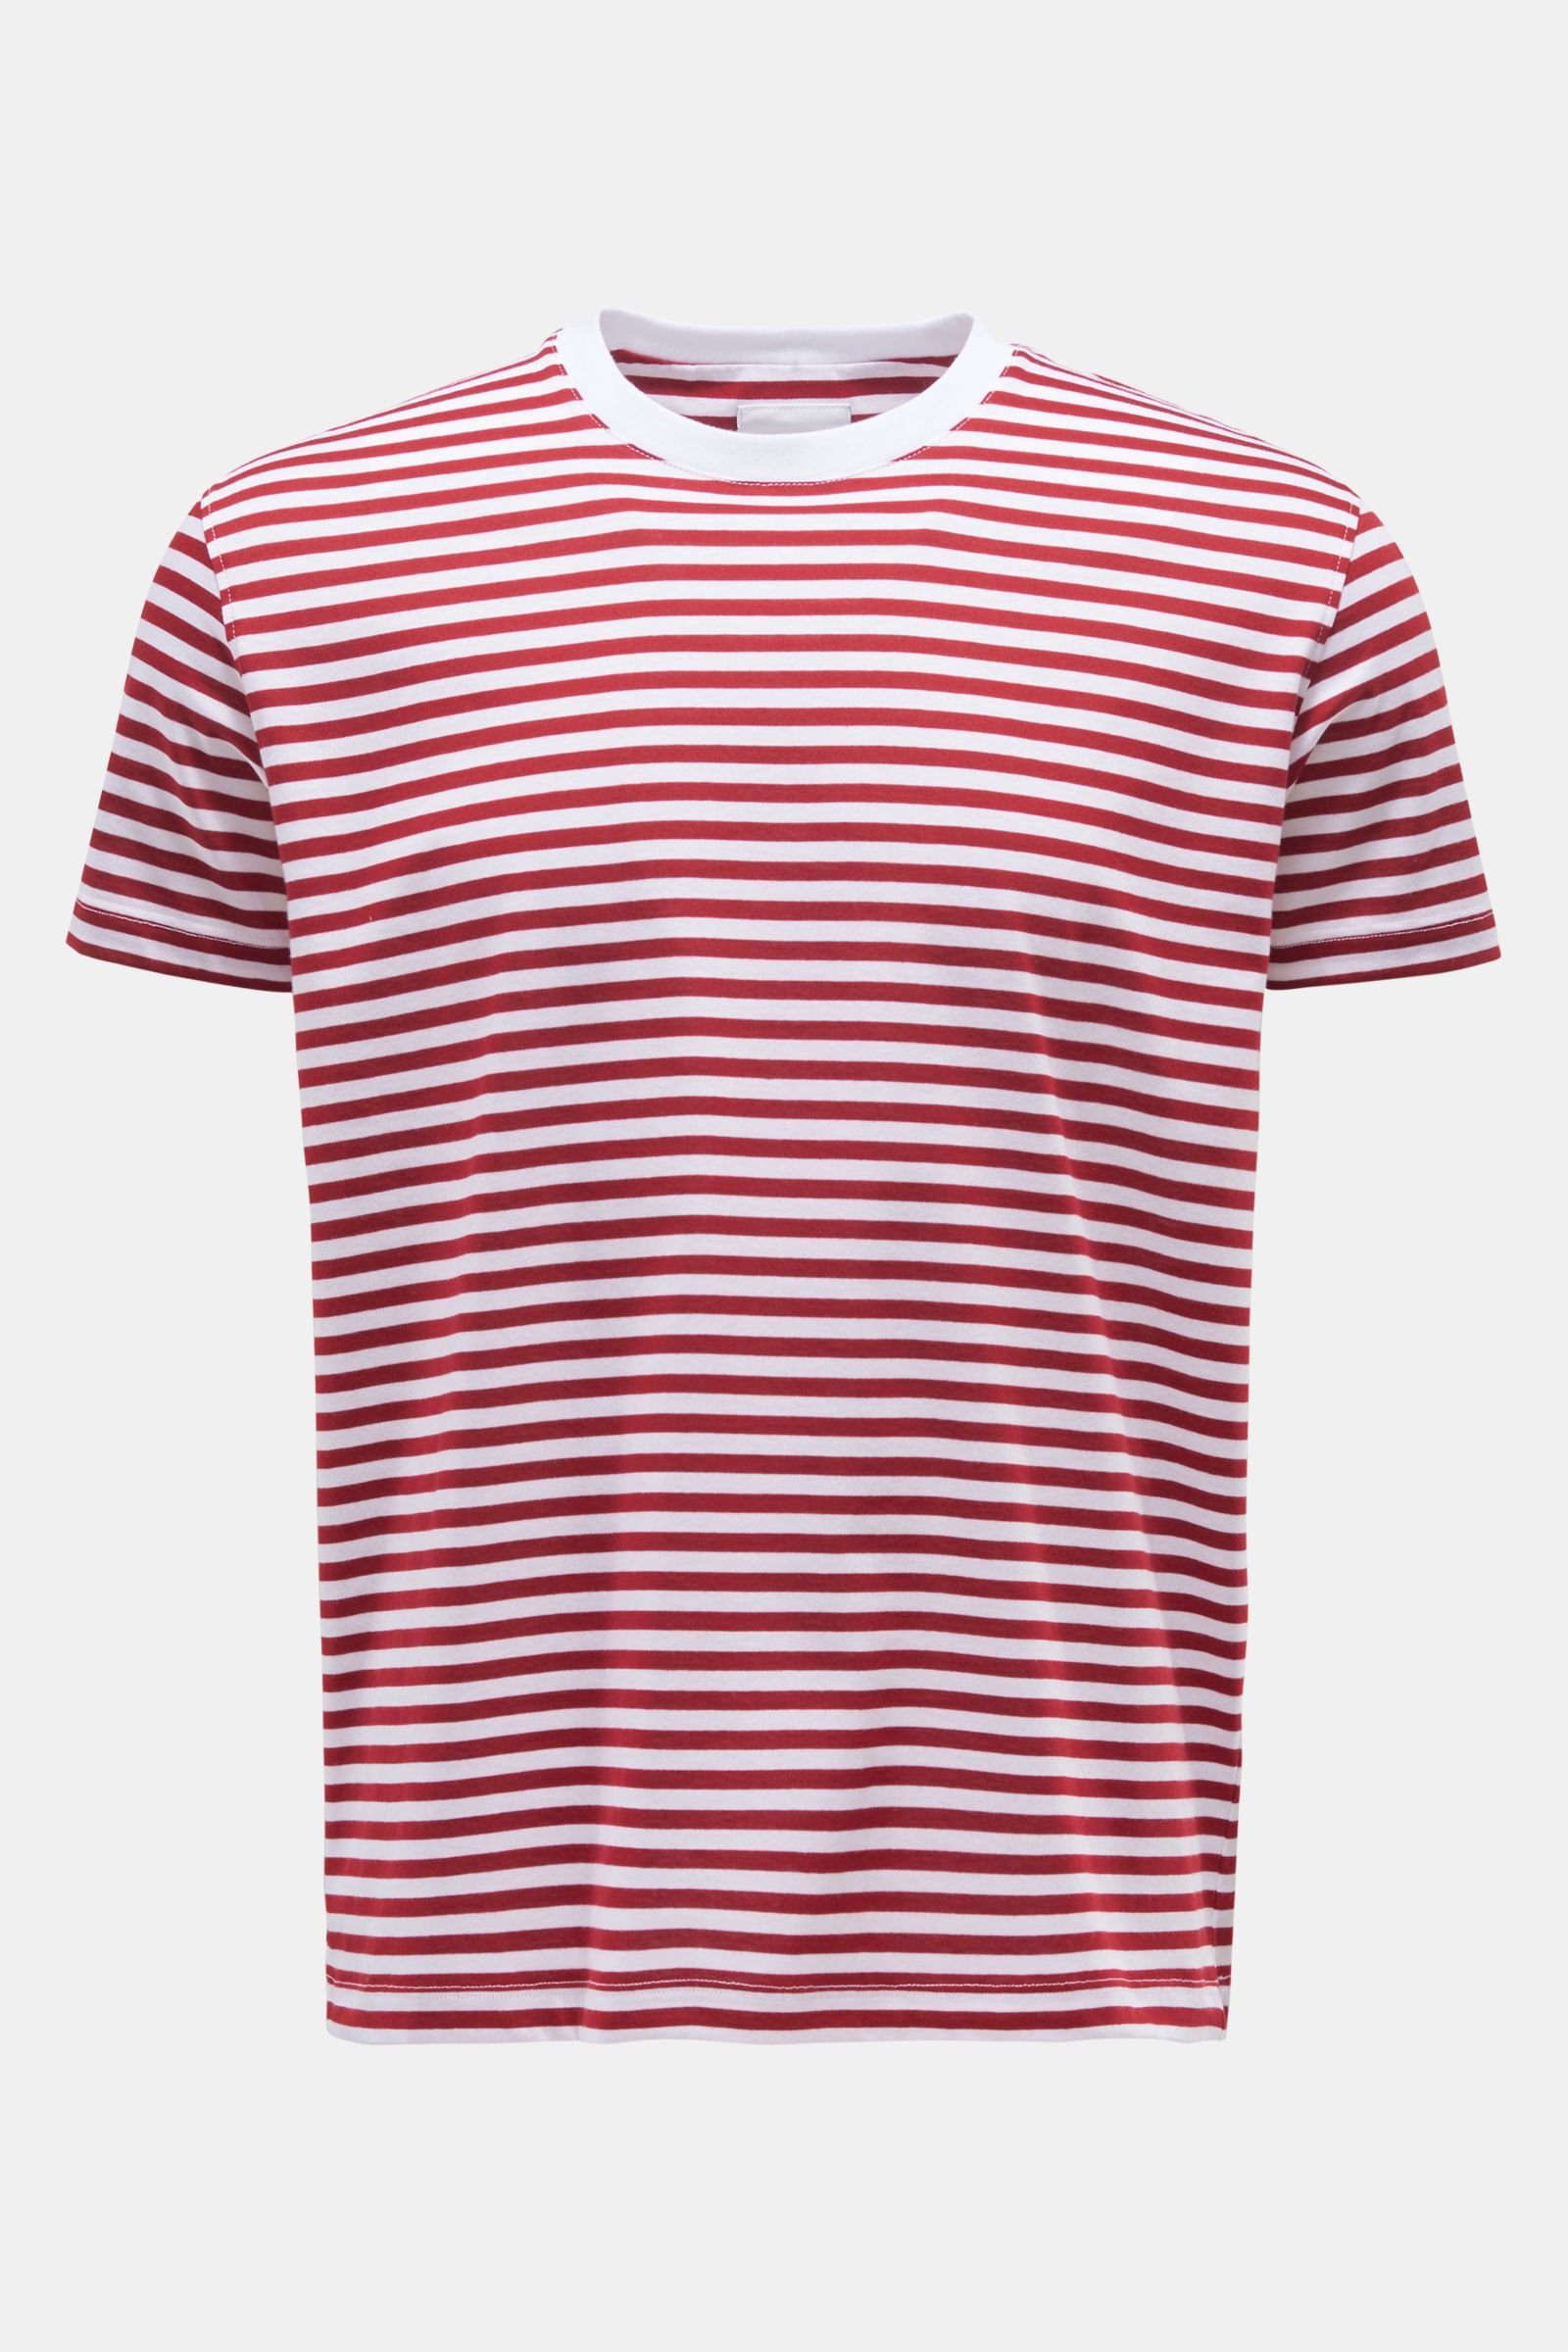 Crew neck T-shirt red/white striped